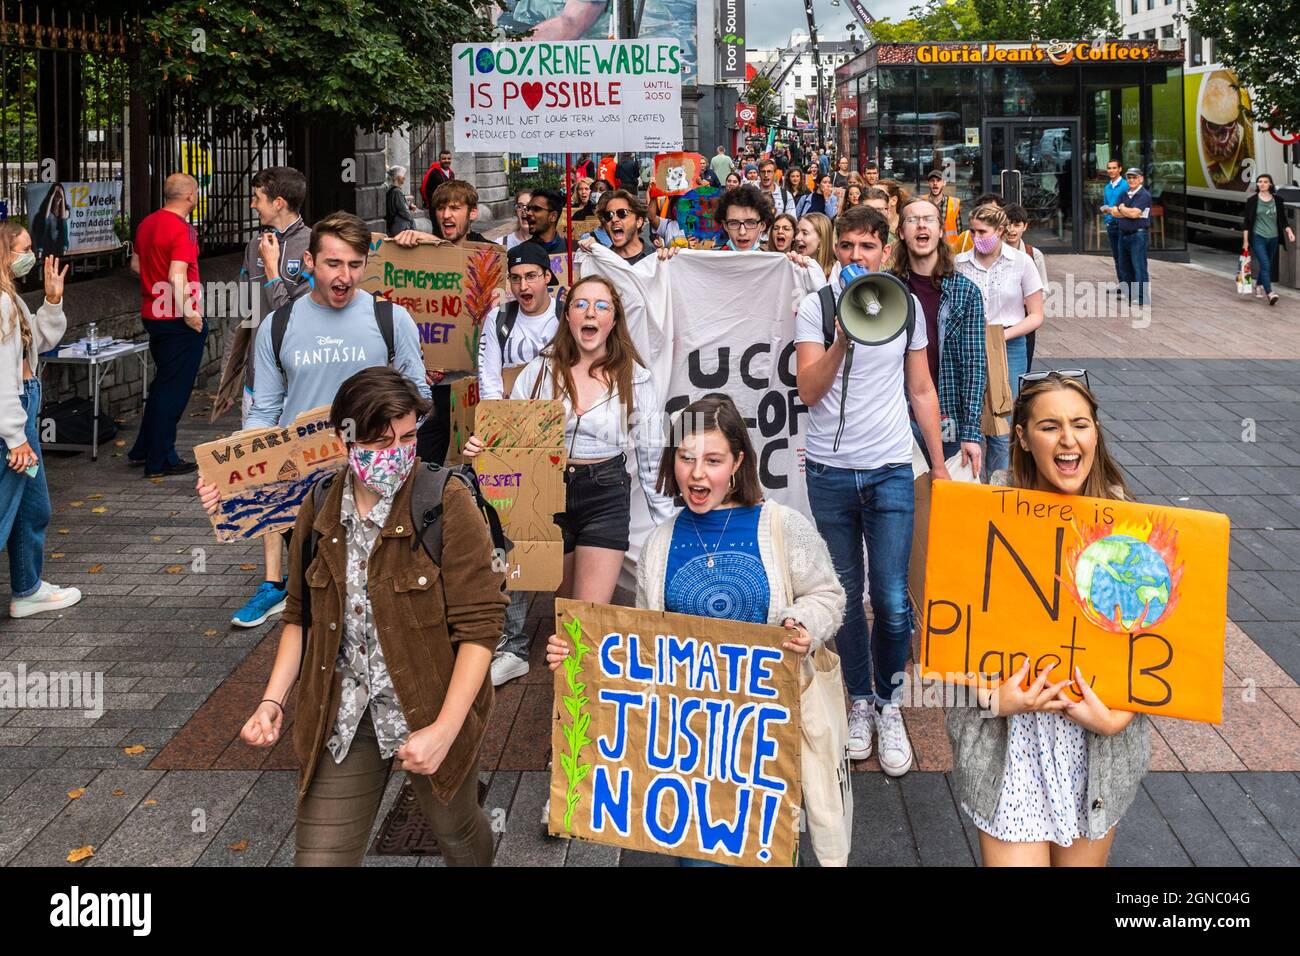 Cork, Ireland. 24th Sep, 2021. Fridays for Future held a global climate strike on Grand Parade in Cork city today, demanding climate justice within Ireland and around the world. Many protestors marched from UCC to Cork city centre. Credit: AG News/Alamy Live News Stock Photo